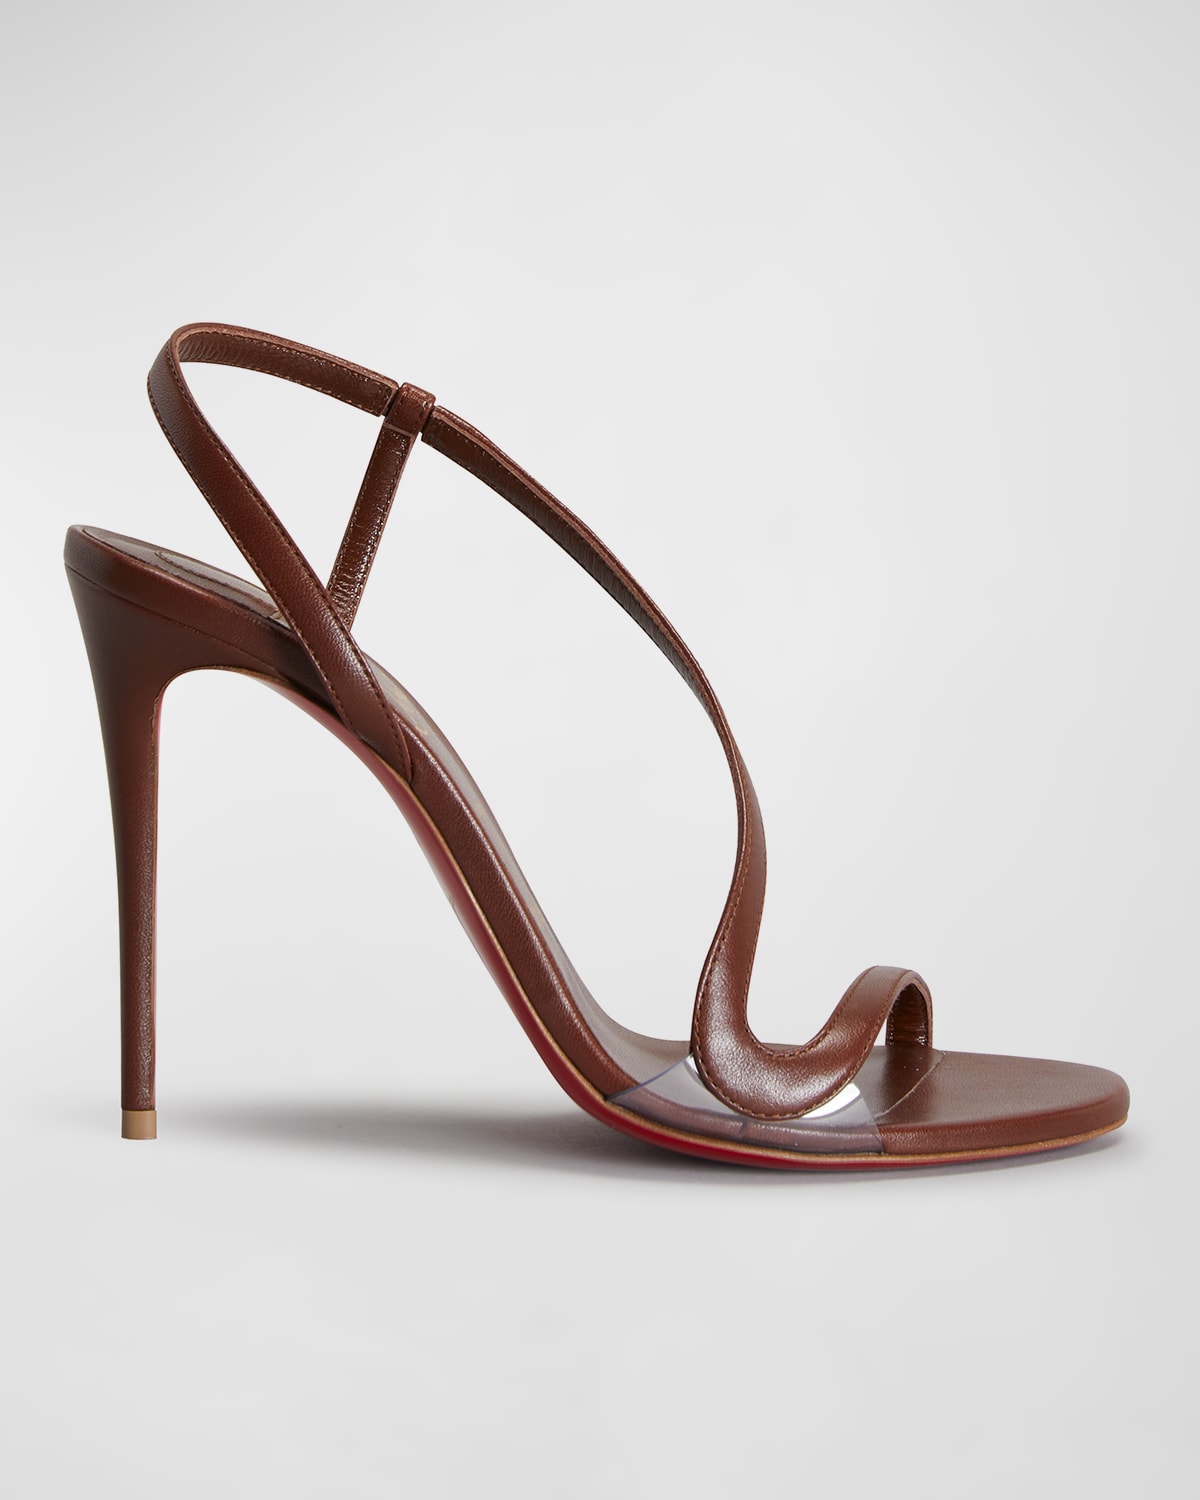 CHRISTIAN LOUBOUTIN ROSALIE LEATHER RED SOLE STILETTO SANDALS